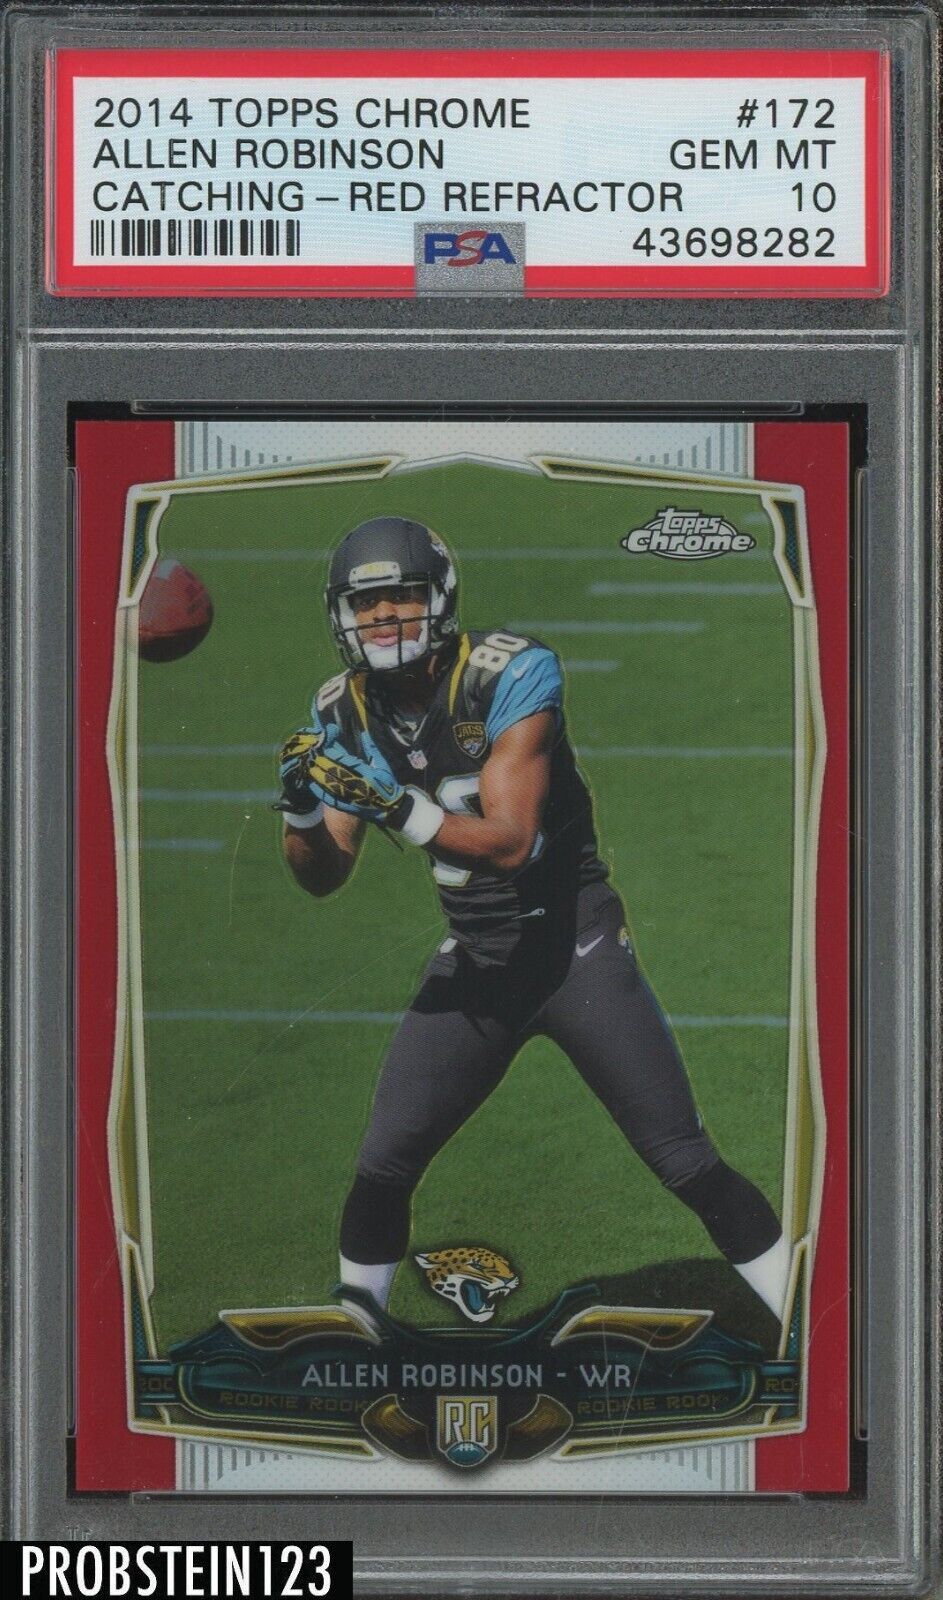 2014 Topps Chrome Red Refractor Allen Robinson Catching RC Rookie 1/25 PSA 10